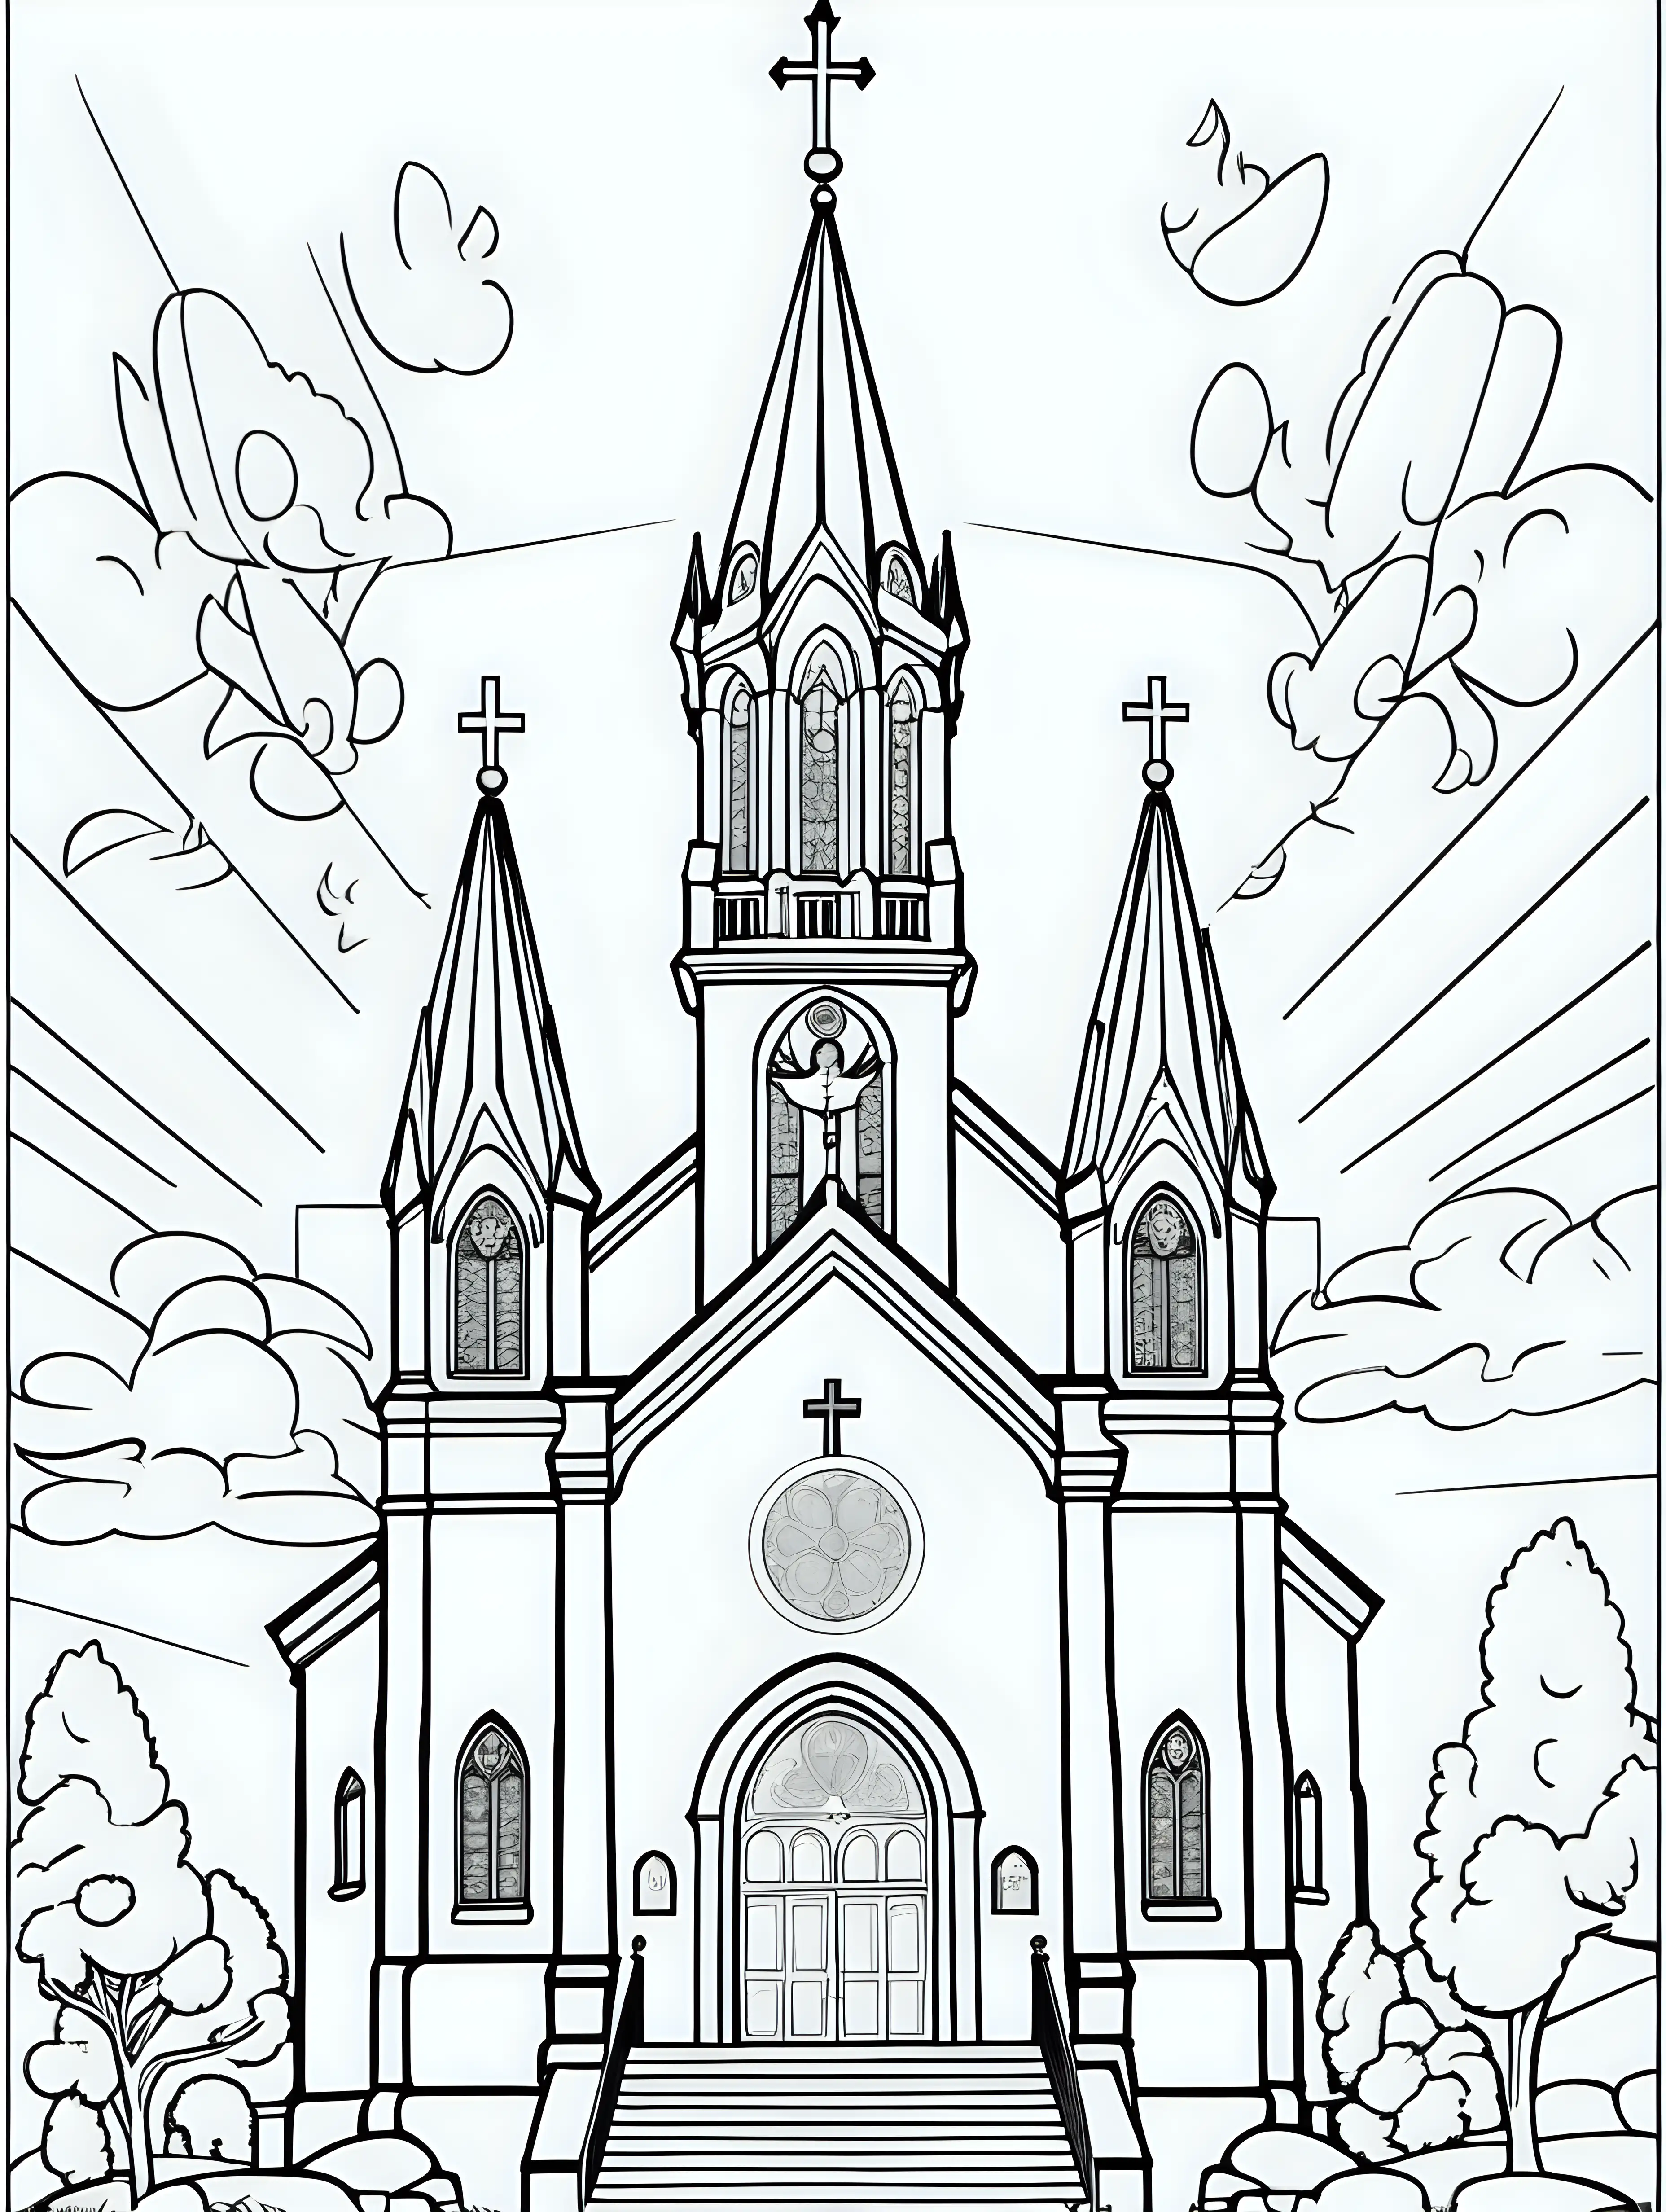 Cartoon Style Coloring Page of a Catholic Church